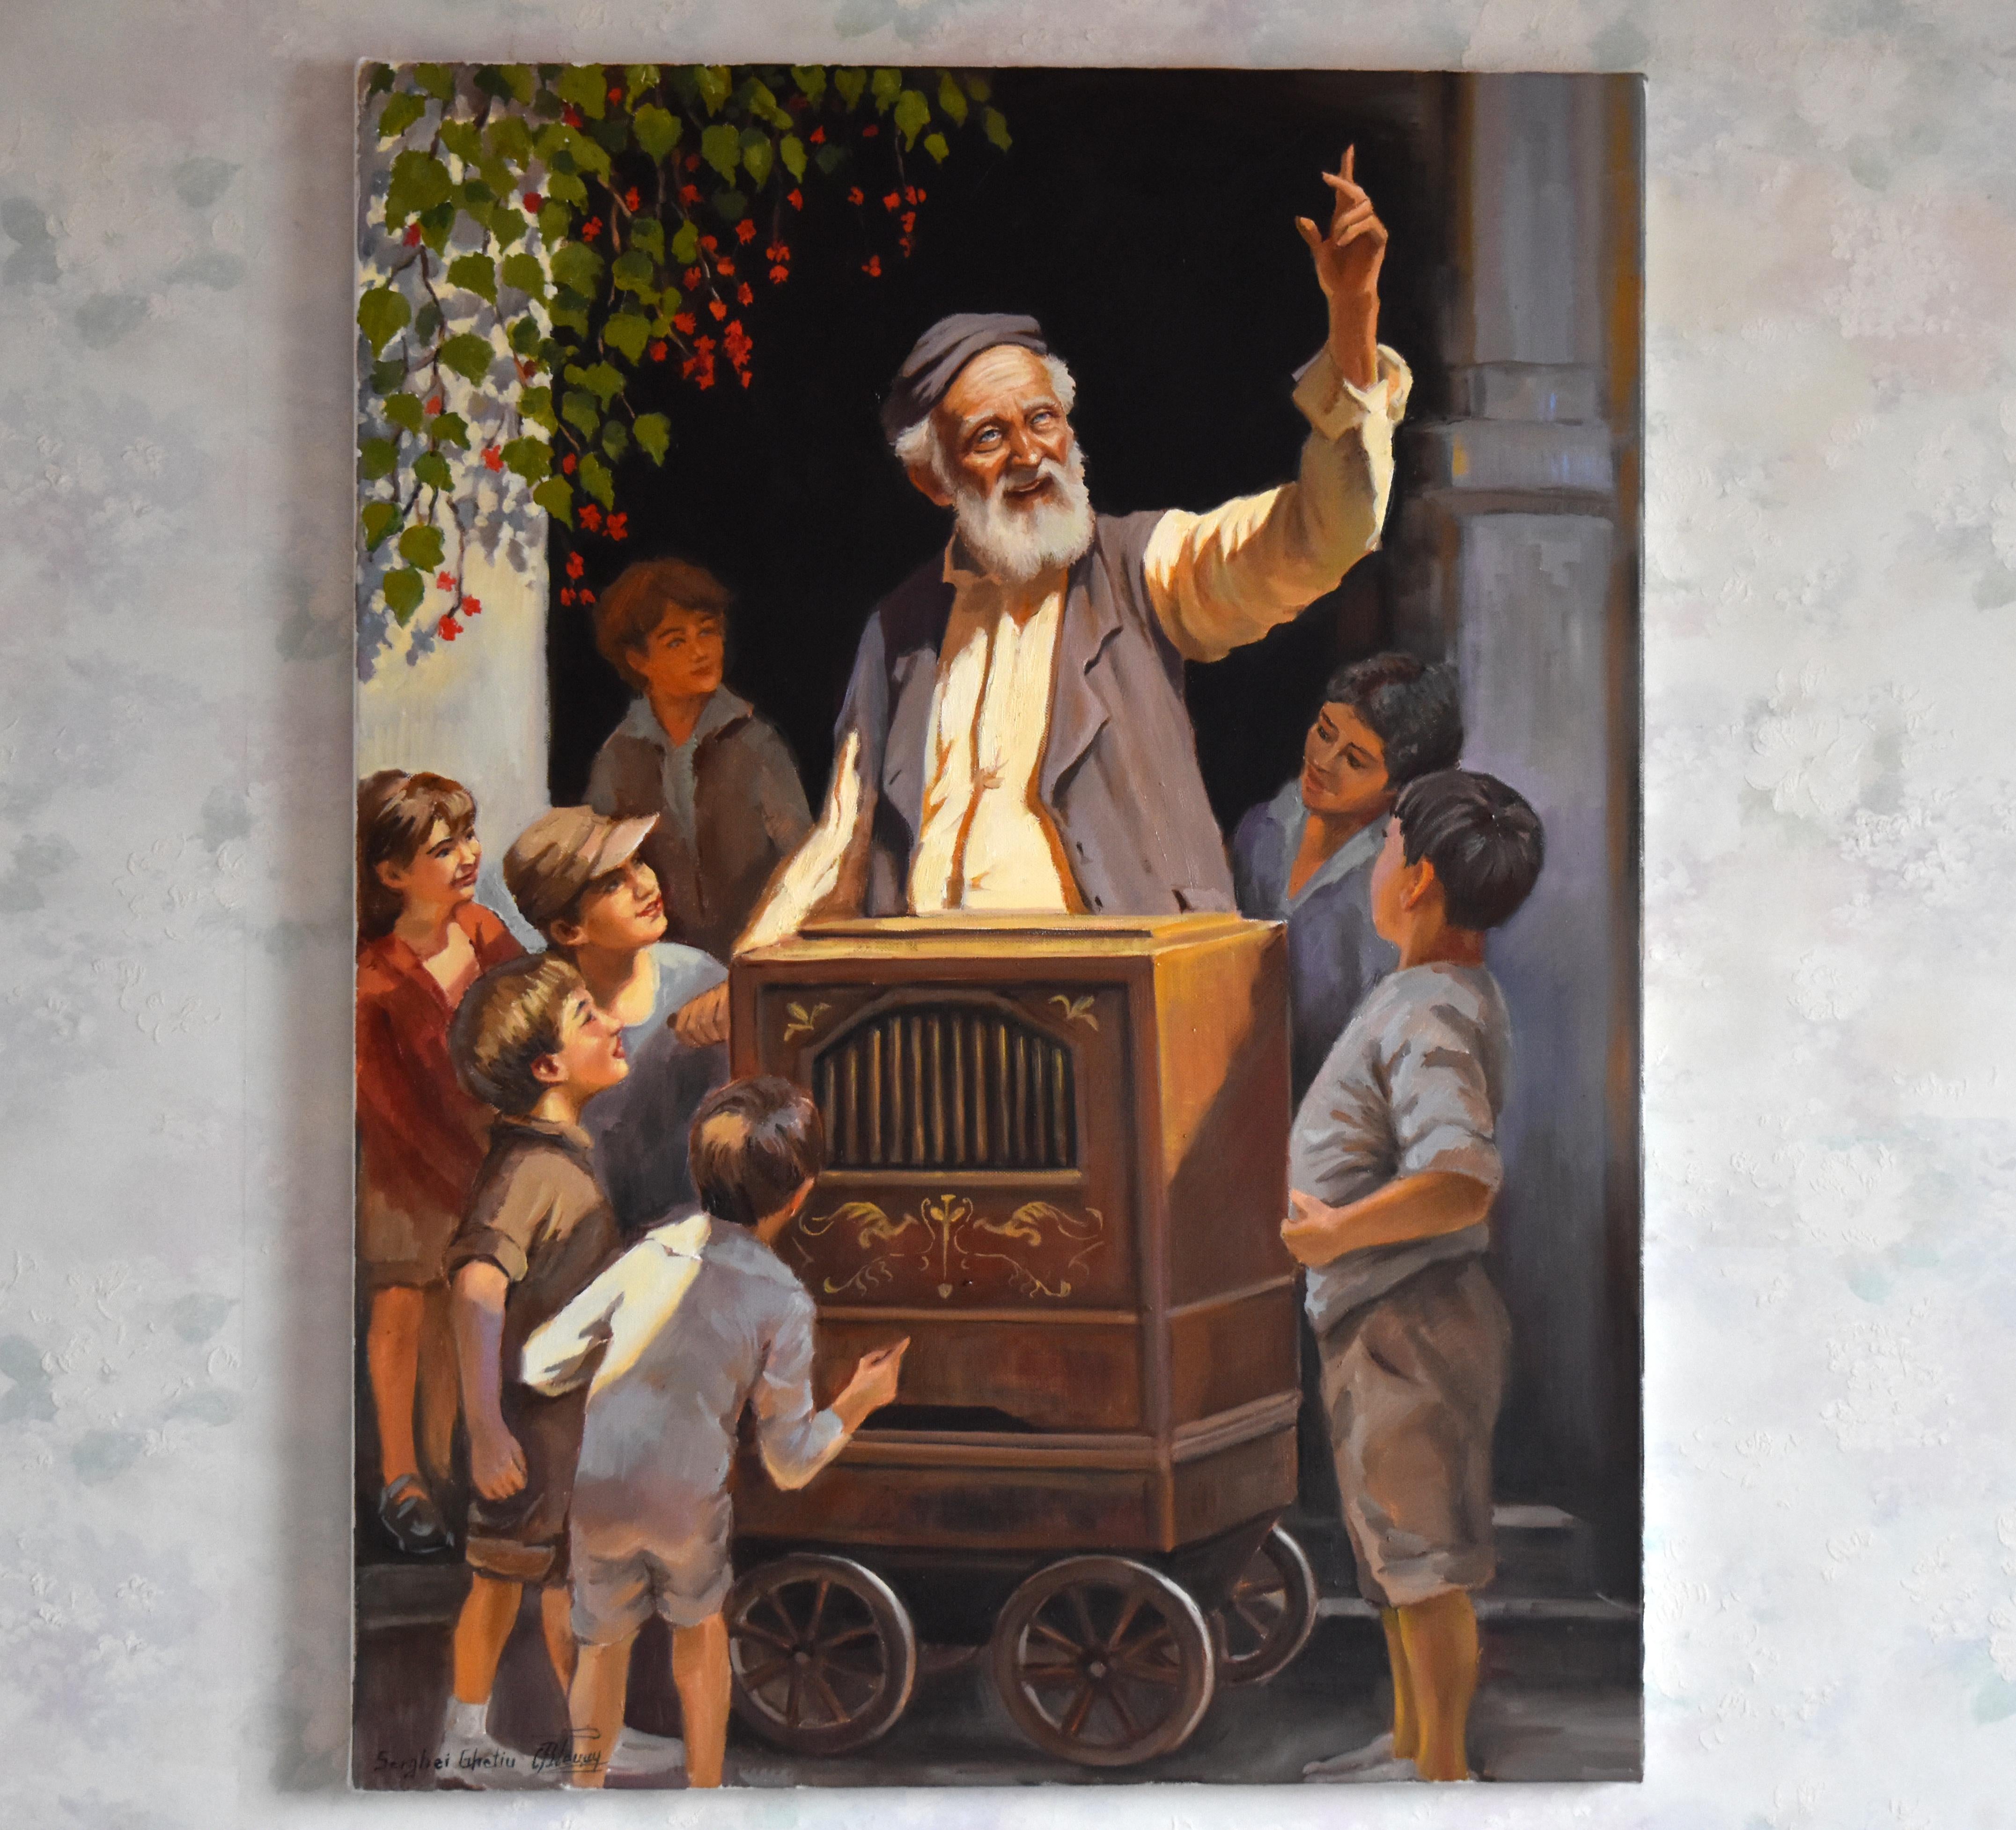 The old organ grinder and his friends - Painting by Serghei Ghetiu